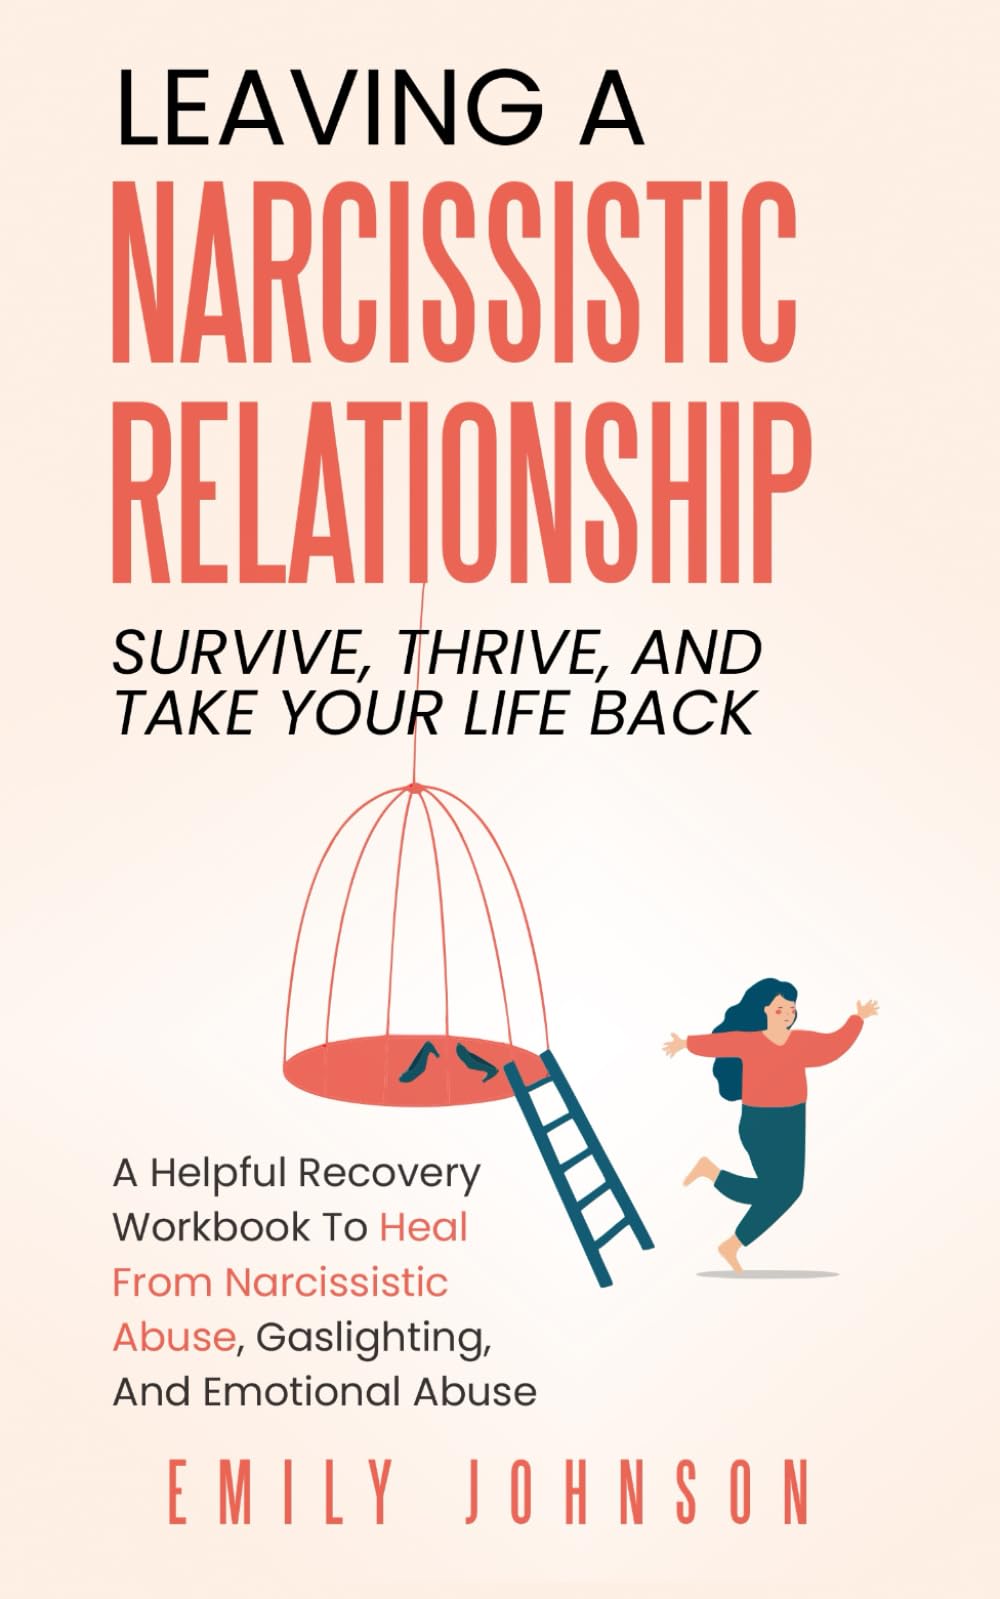 Leaving A Narcissistic Relationship: Survive, Thrive, and Take Your Life Back | A Helpful Recovery Workbook to Heal From Narcissistic Abuse, Gaslighting, and Emotional Abuse